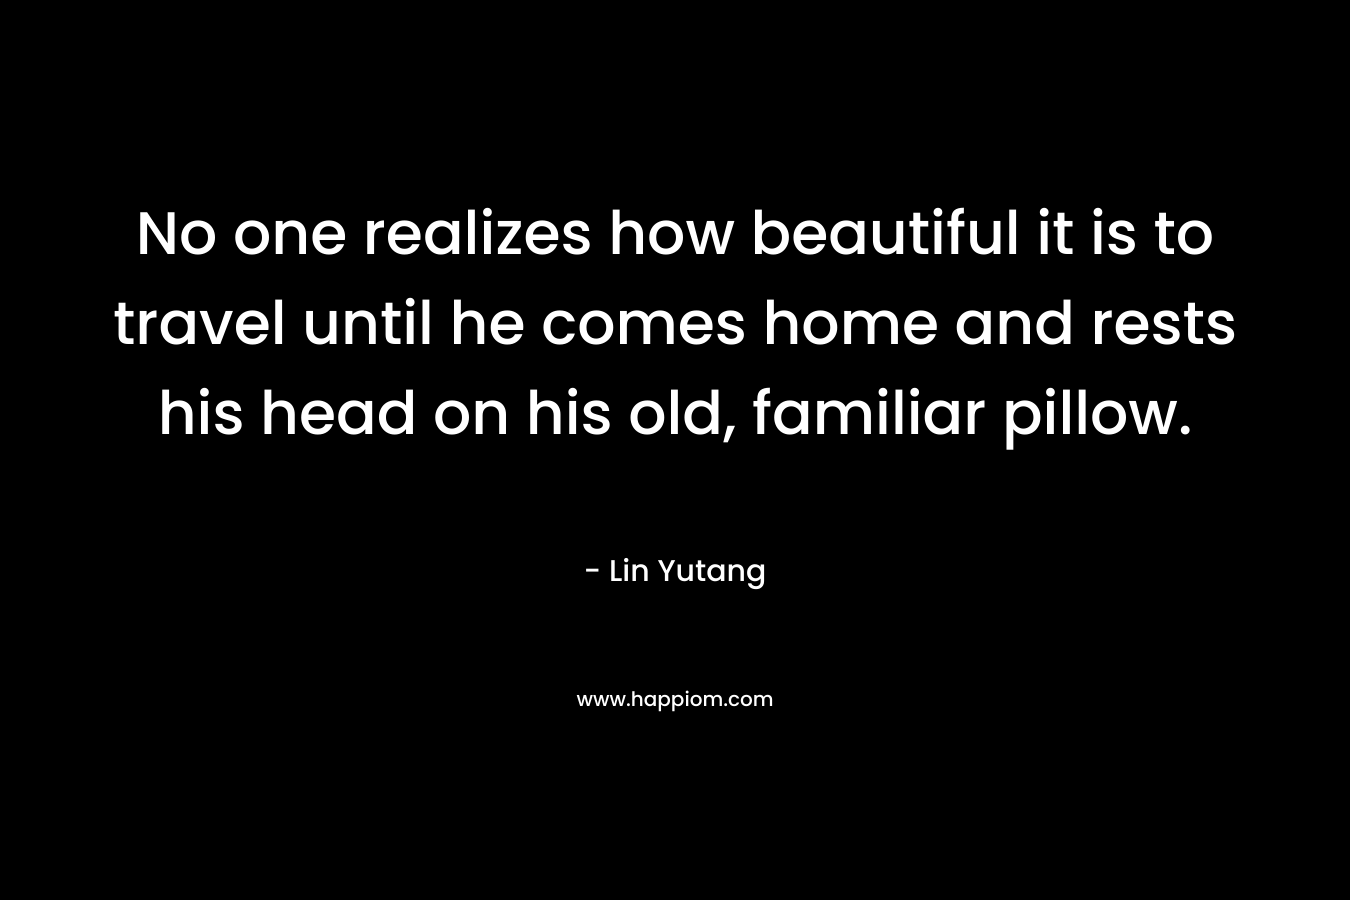 No one realizes how beautiful it is to travel until he comes home and rests his head on his old, familiar pillow.  – Lin Yutang